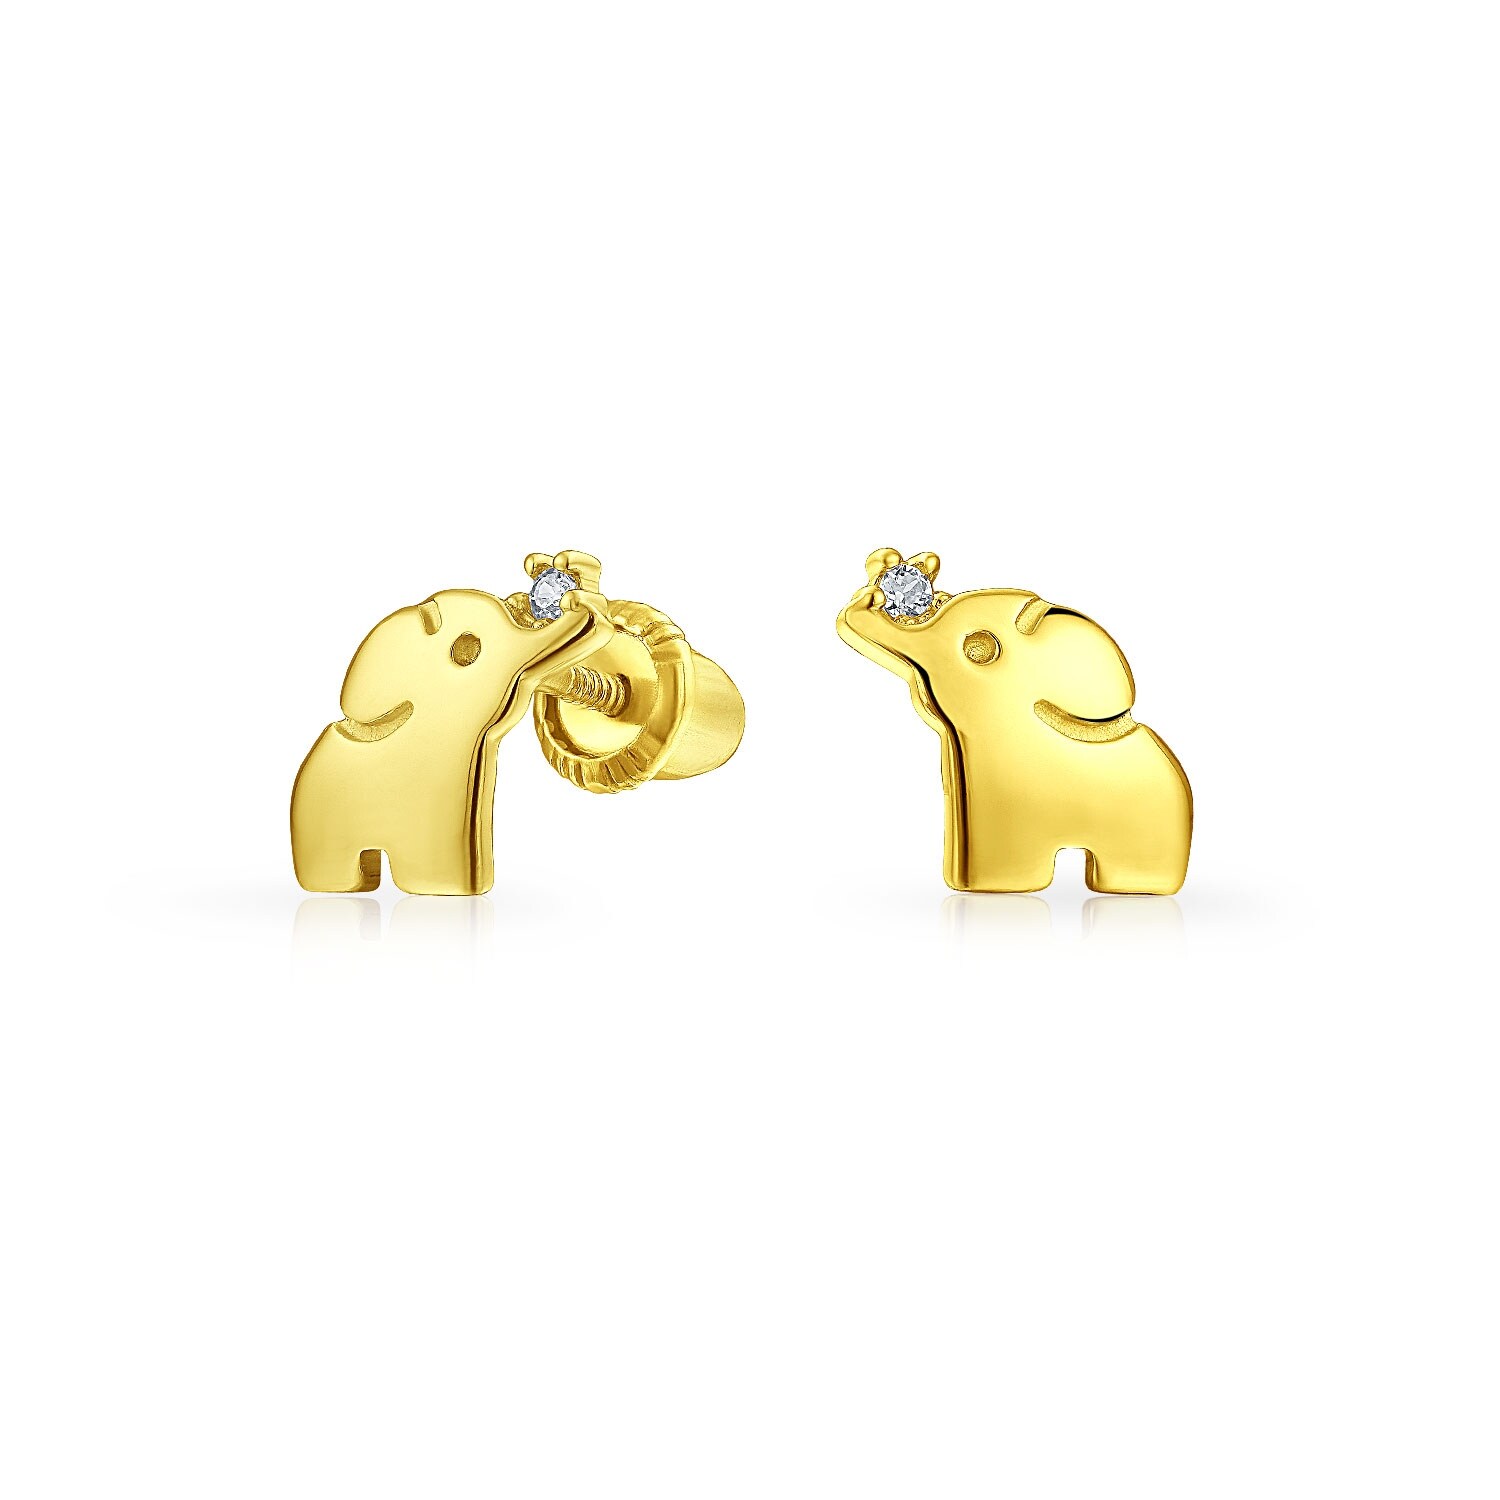 10k Yellow Gold Tiny Elephant with CZ Stud Earrings and Secure Screw-Backs 